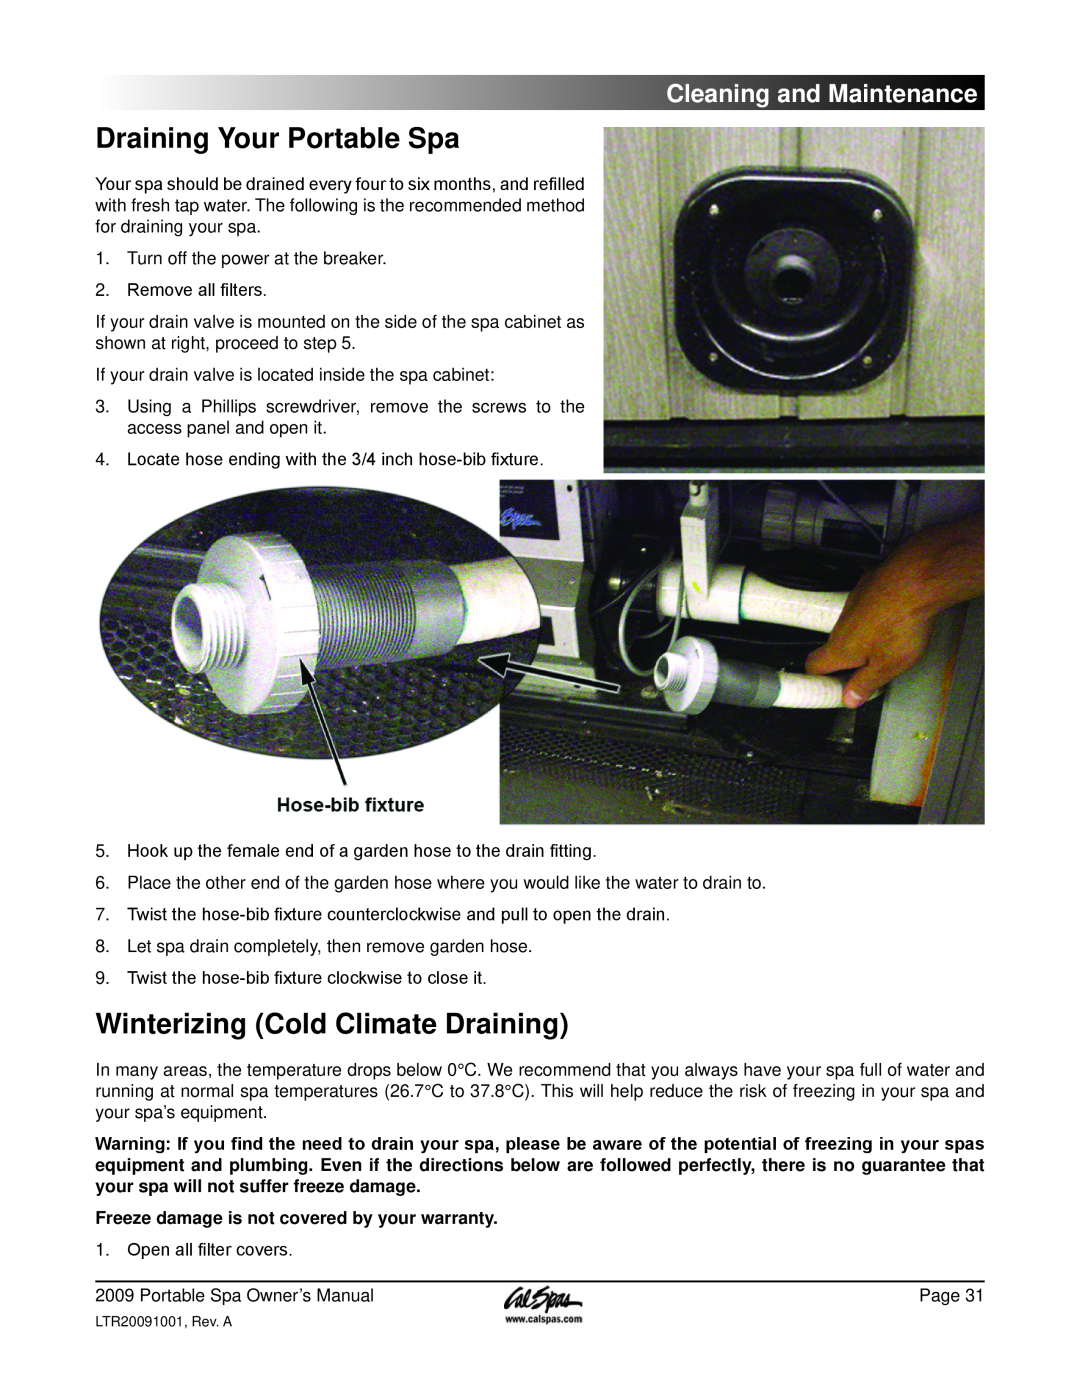 Cal Spas Portable Spas manual Draining Your Portable Spa, Winterizing Cold Climate Draining, Cleaning and Maintenance 